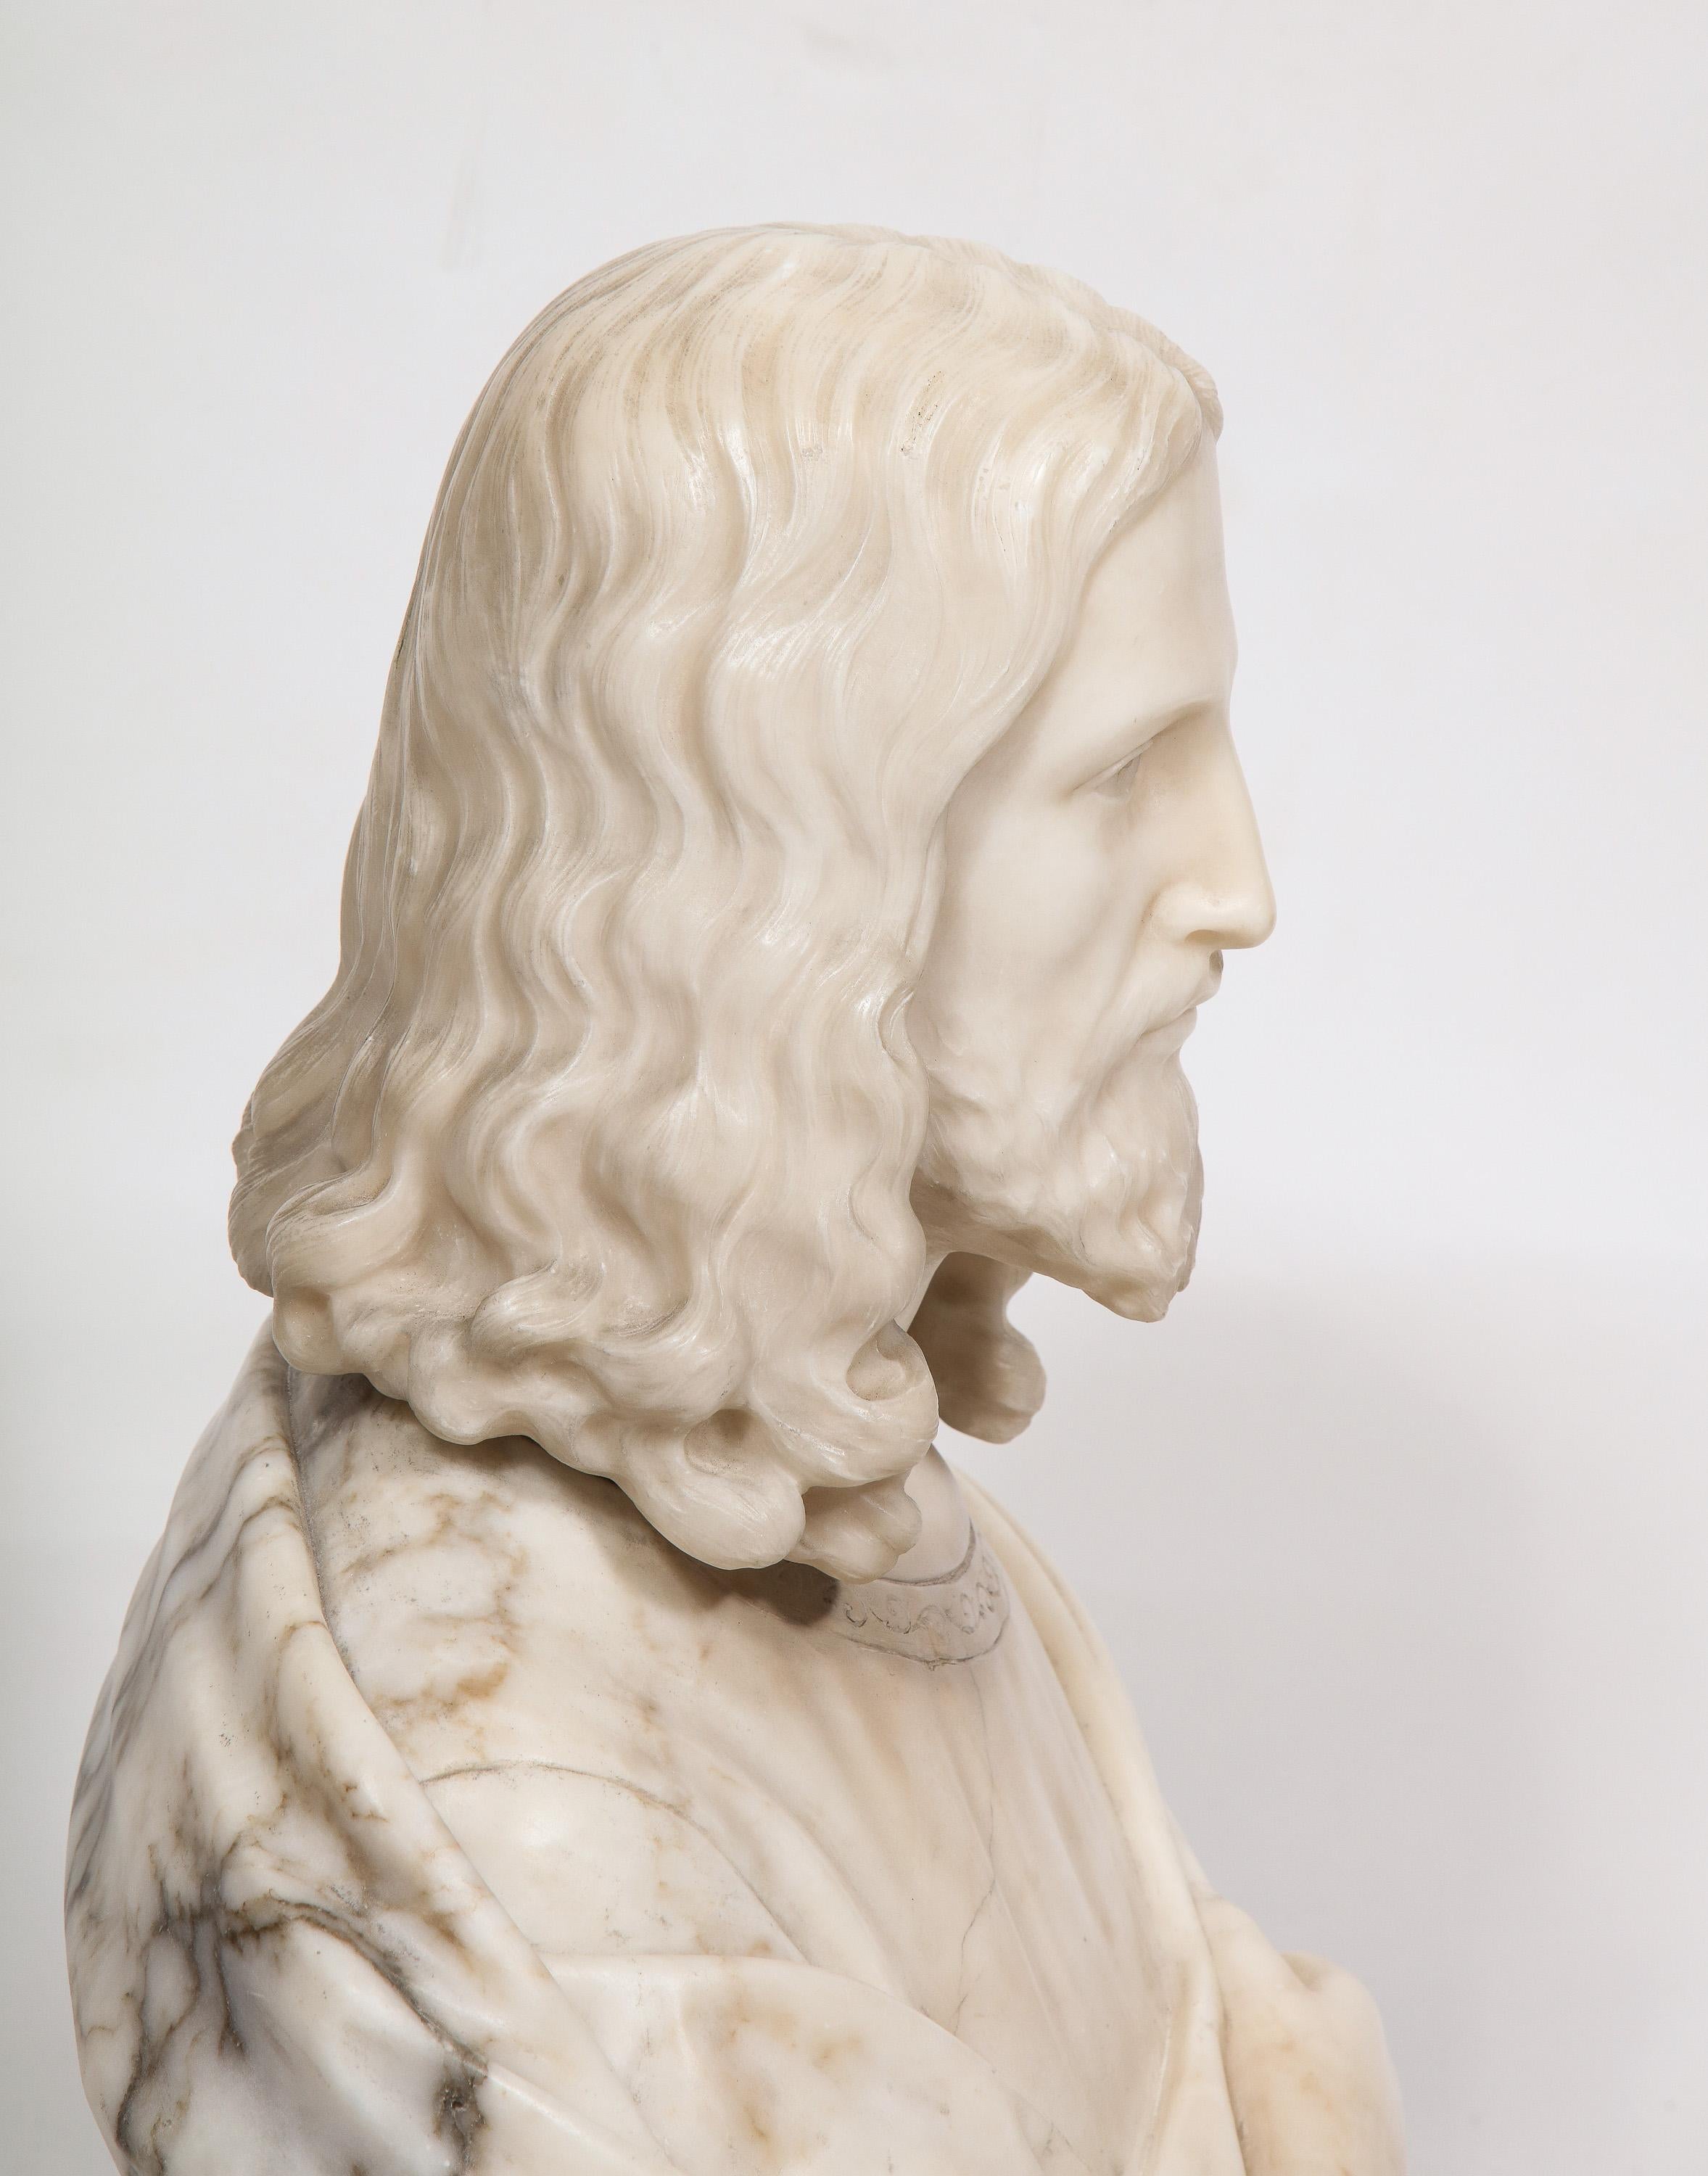 Baroque Magnificent 19th Century Italian Alabaster Bust Sculpture of Holy Jesus Christ